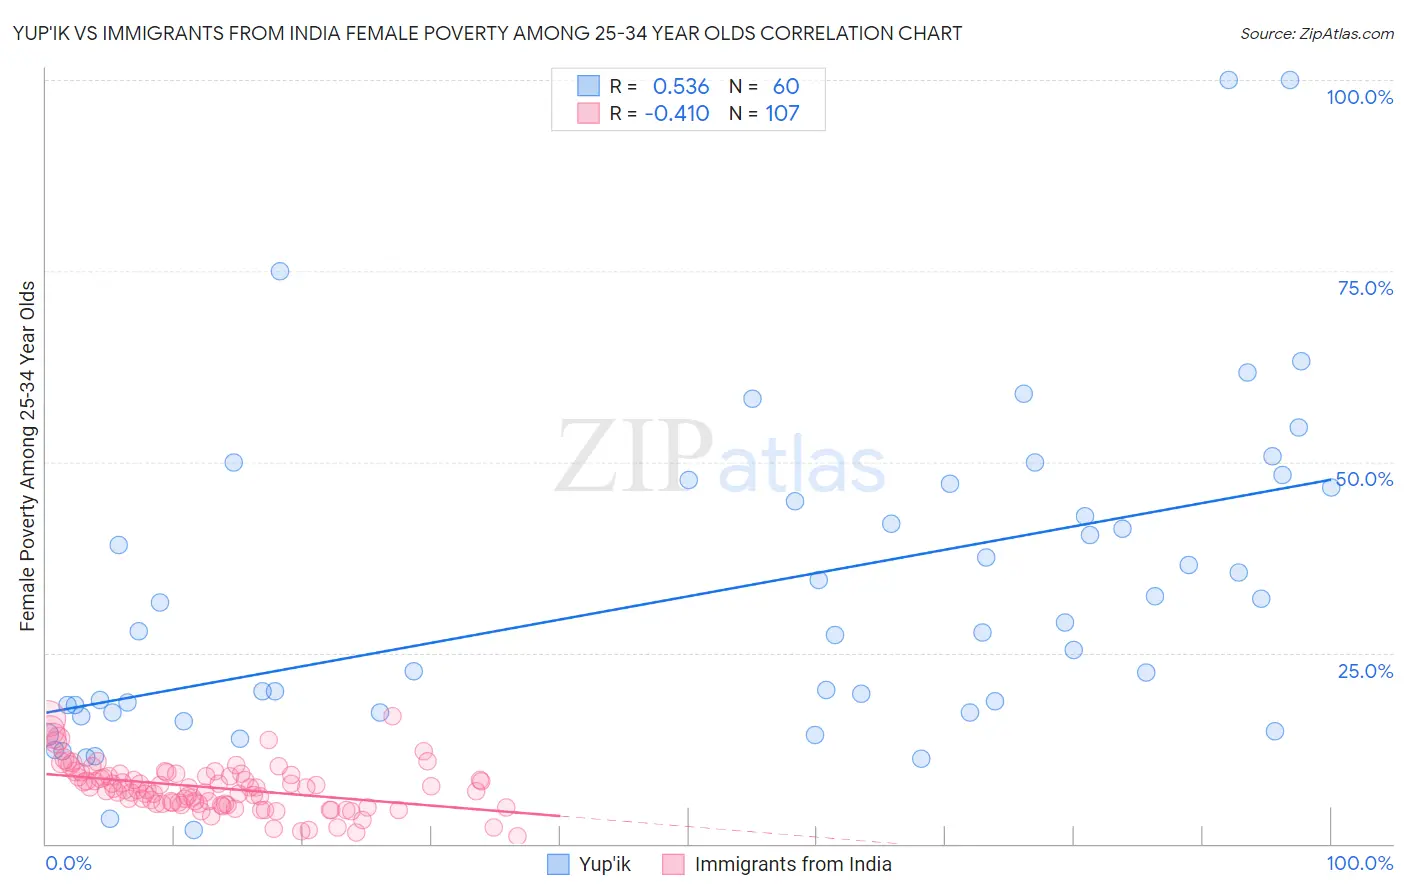 Yup'ik vs Immigrants from India Female Poverty Among 25-34 Year Olds